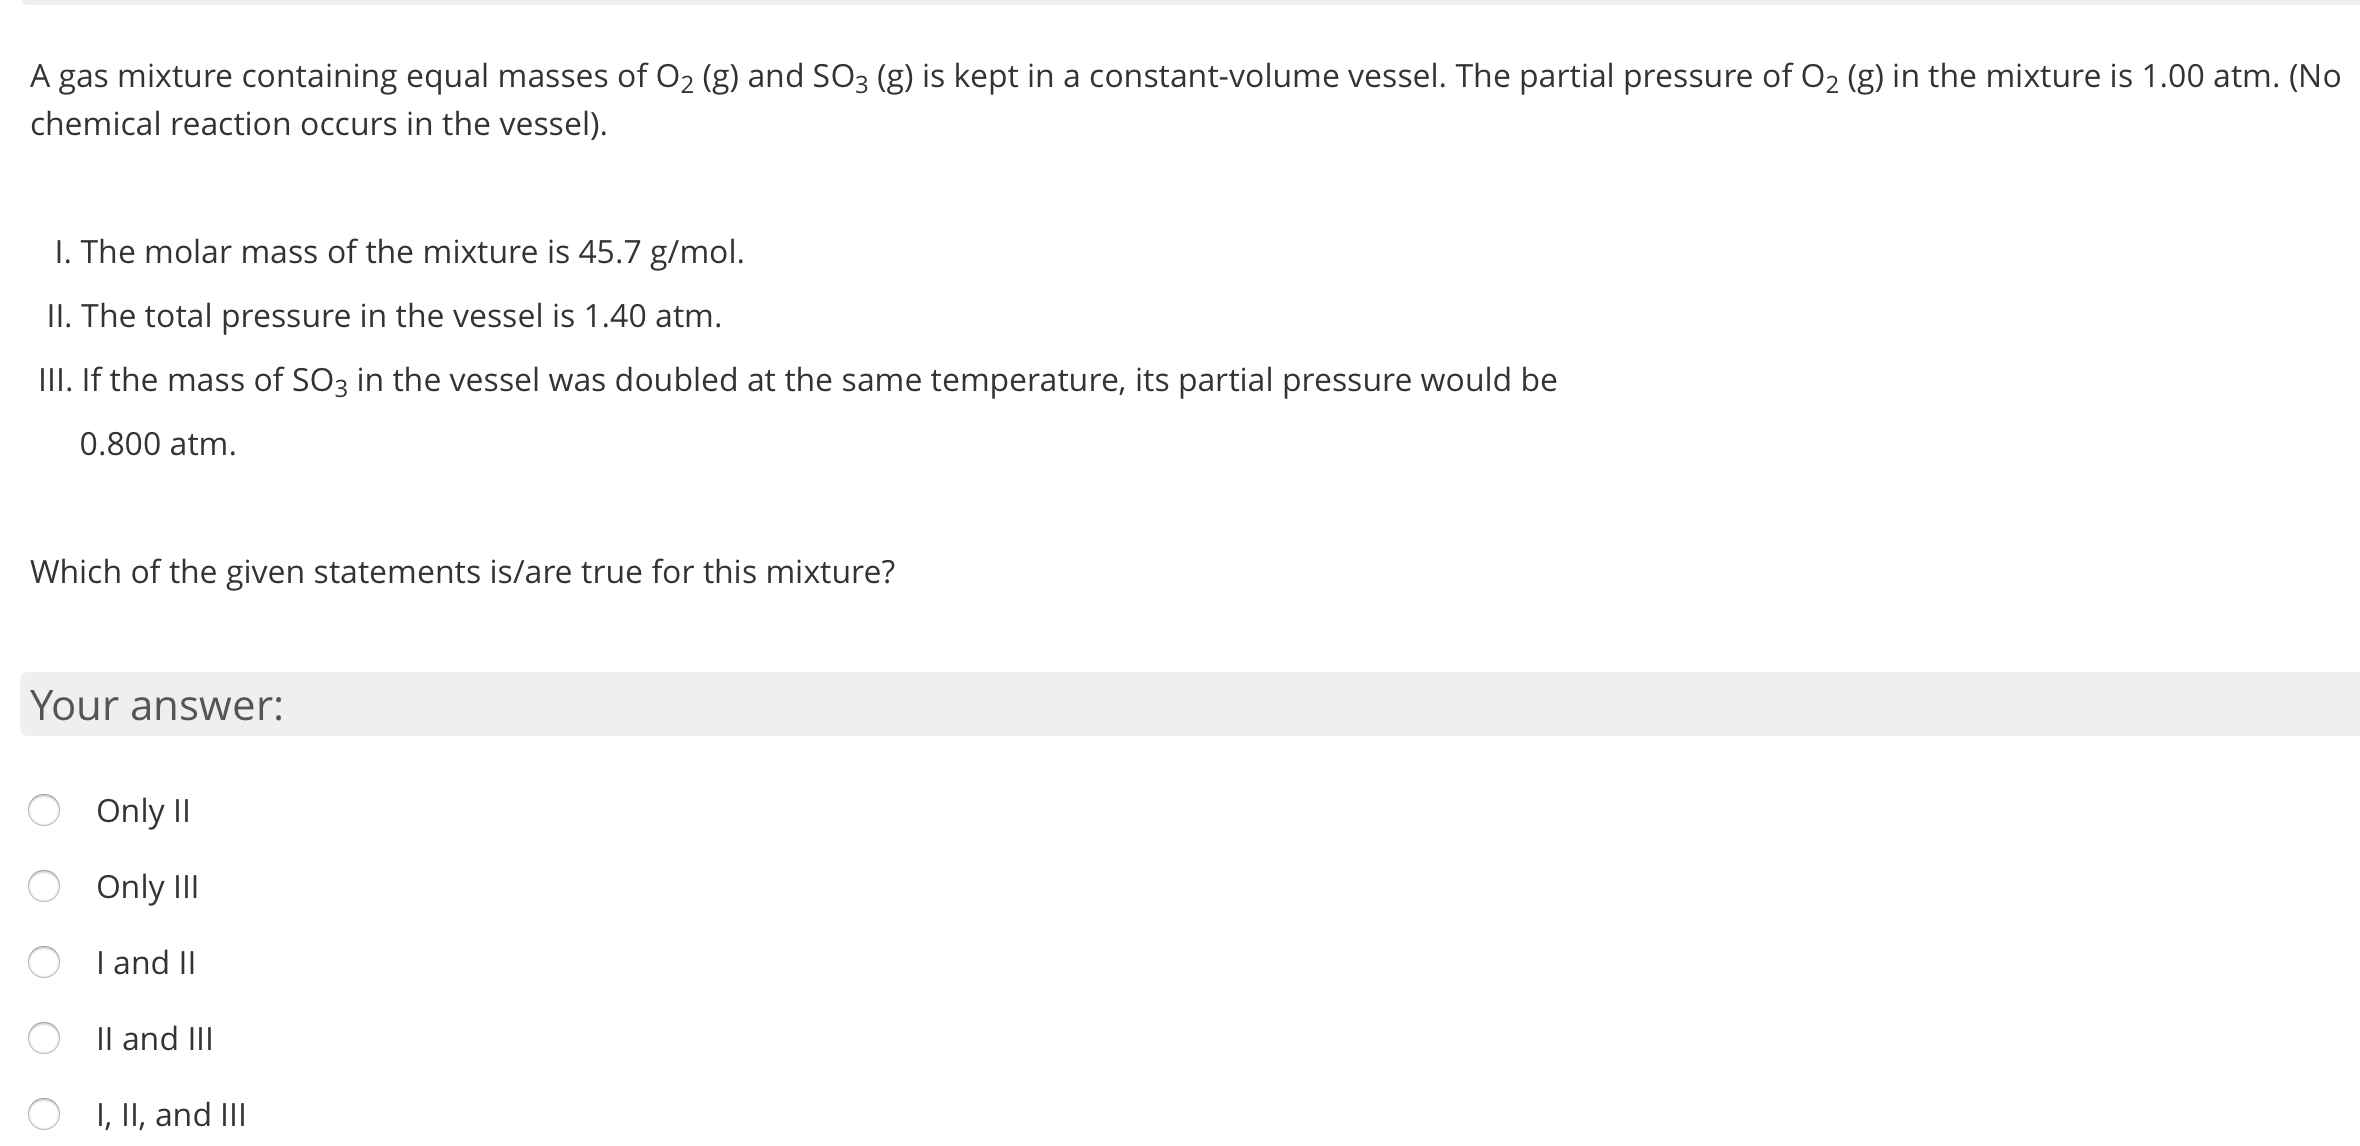 A gas mixture containing equal masses of O2 (g) and SO3 (g) is kept in a constant-volume vessel. The partial pressure of O2 (g) in the mixture is 1.00 atm. (No
chemical reaction occurs in the vessel).
I. The molar mass of the mixture is 45.7 g/mol.
II. The total pressure in the vessel is 1.40 atm.
III. If the mass of SO3 in the vessel was doubled at the same temperature, its partial pressure would be
0.800 atm.
Which of the given statements is/are true for this mixture?
Your answer:
Only II
Only II
I and II
Il and III
O I, II, and III
